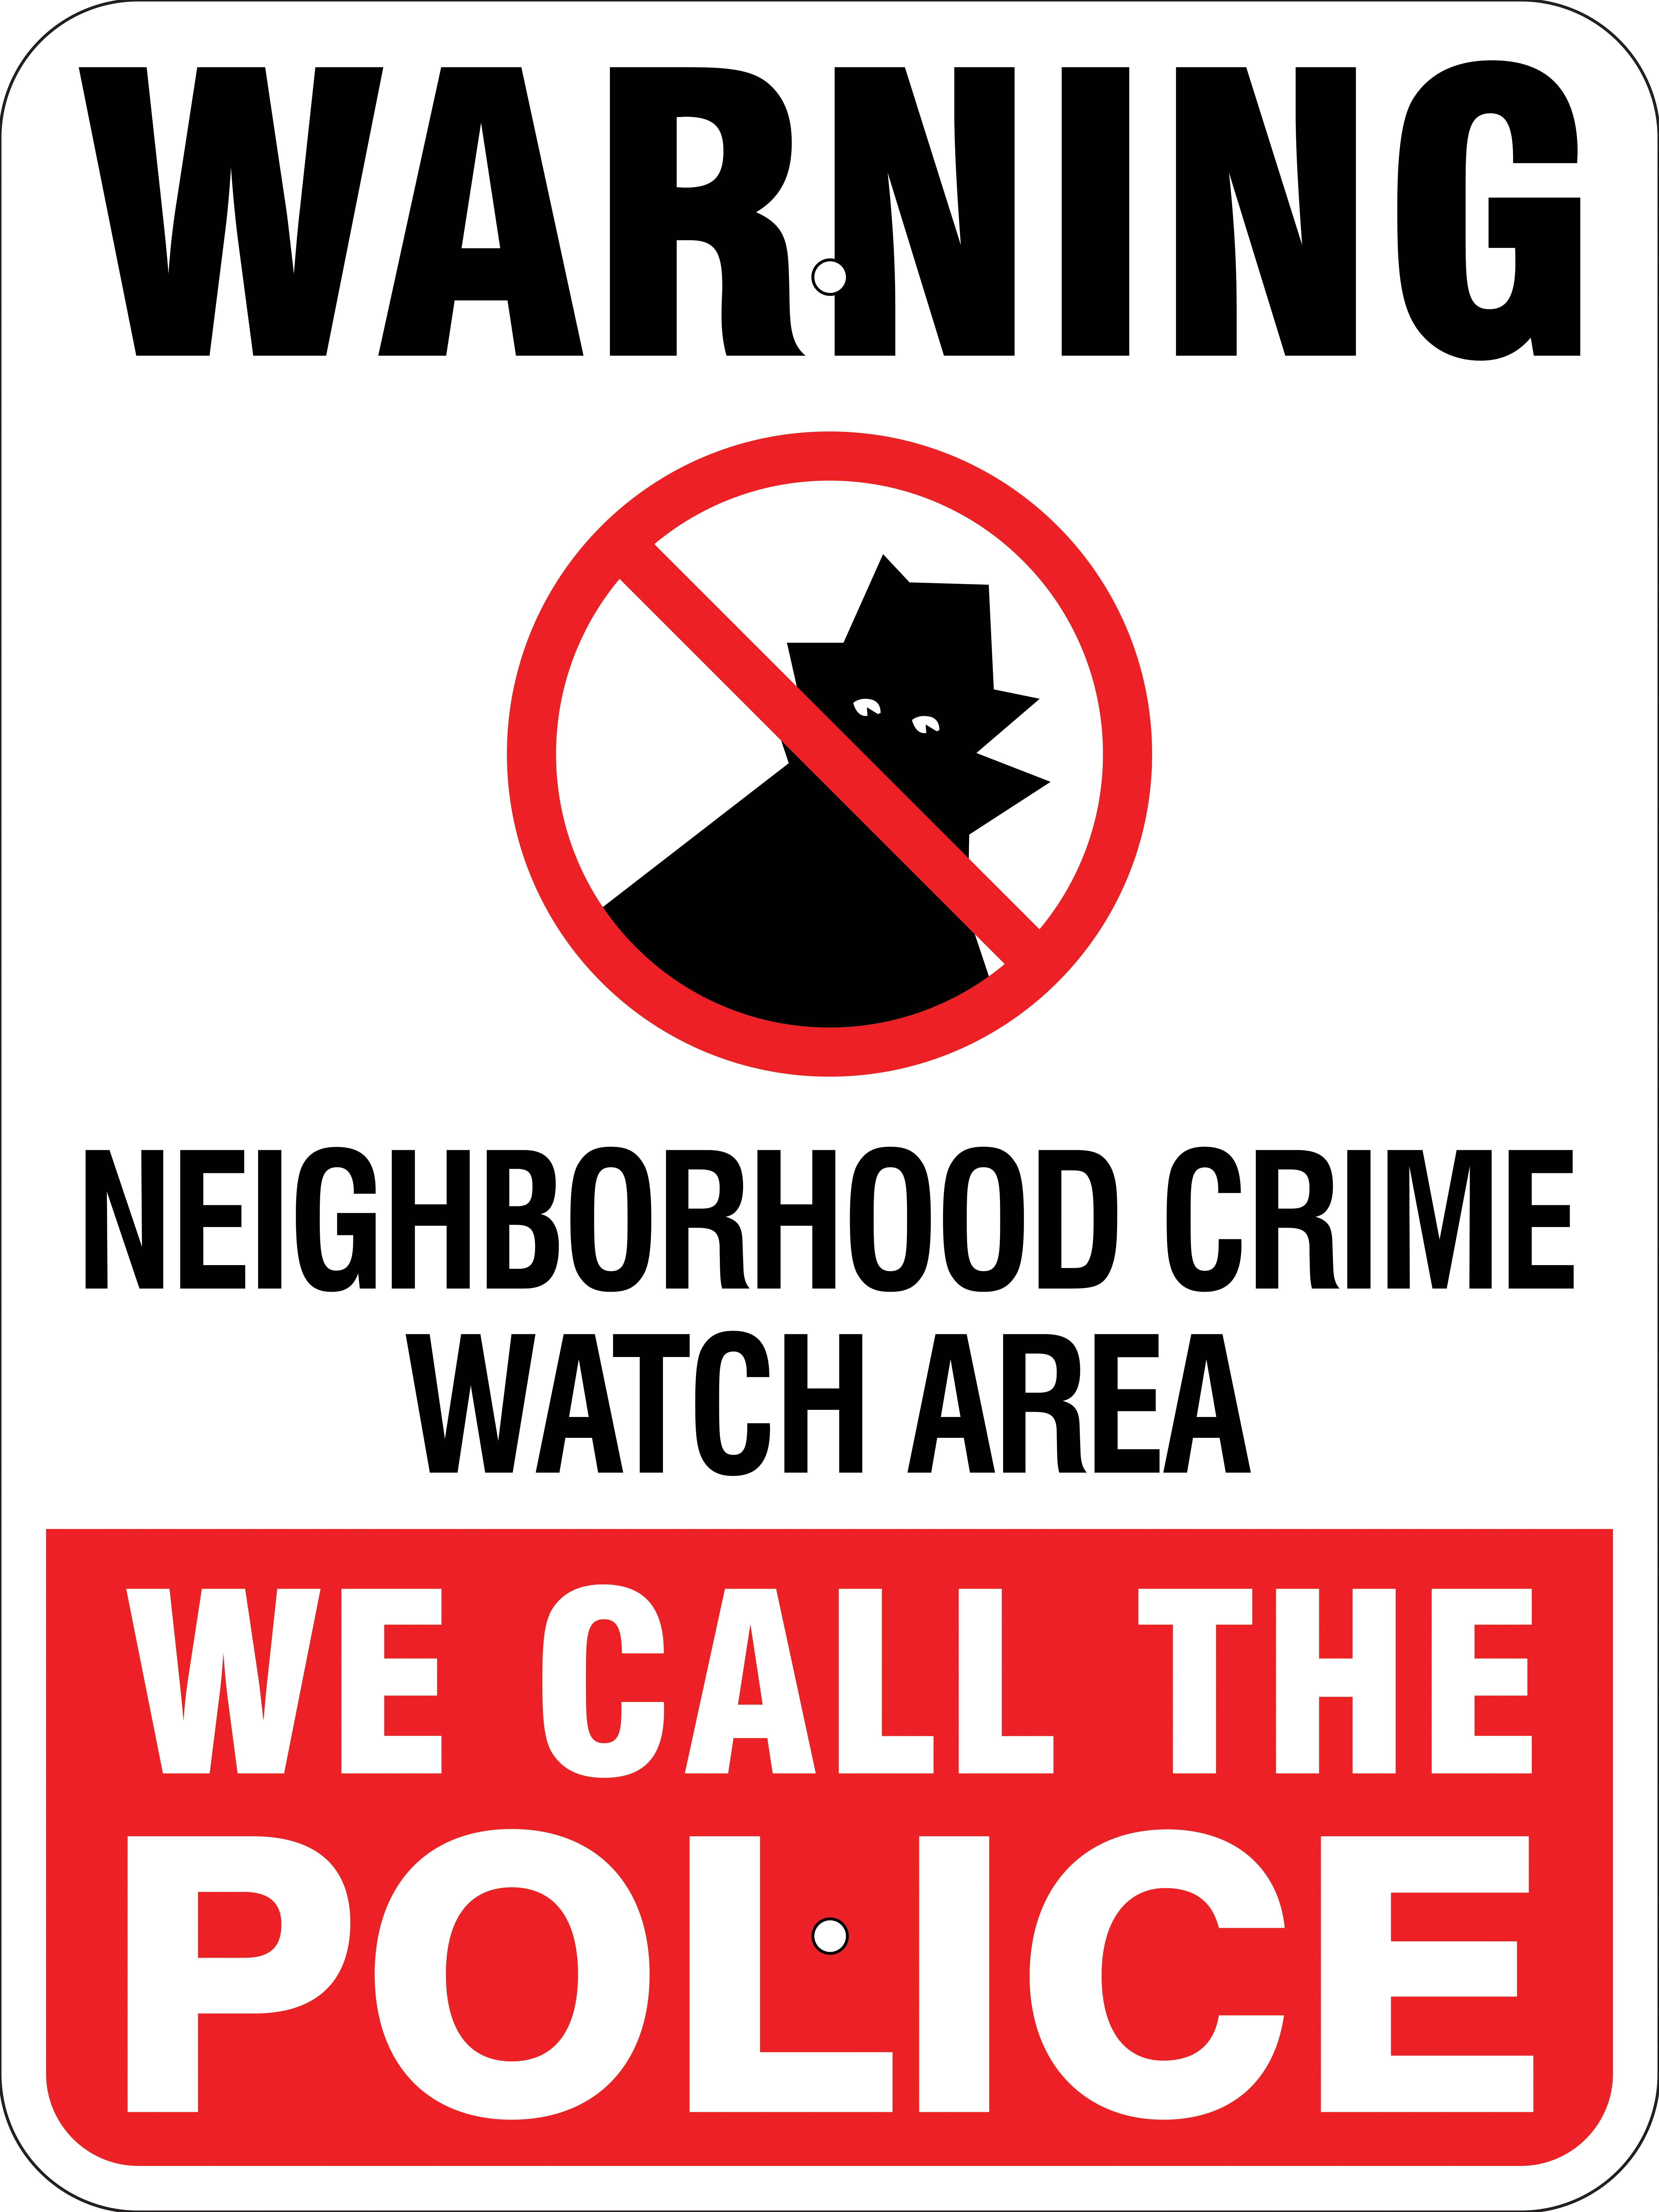 Crime Watch Zone Metal Sign, White/Black/Blue, Var. Sizes, Reflective  Grades, Holes, Overlaminate Y/N, Quality Materials, Long Life #NW-1002